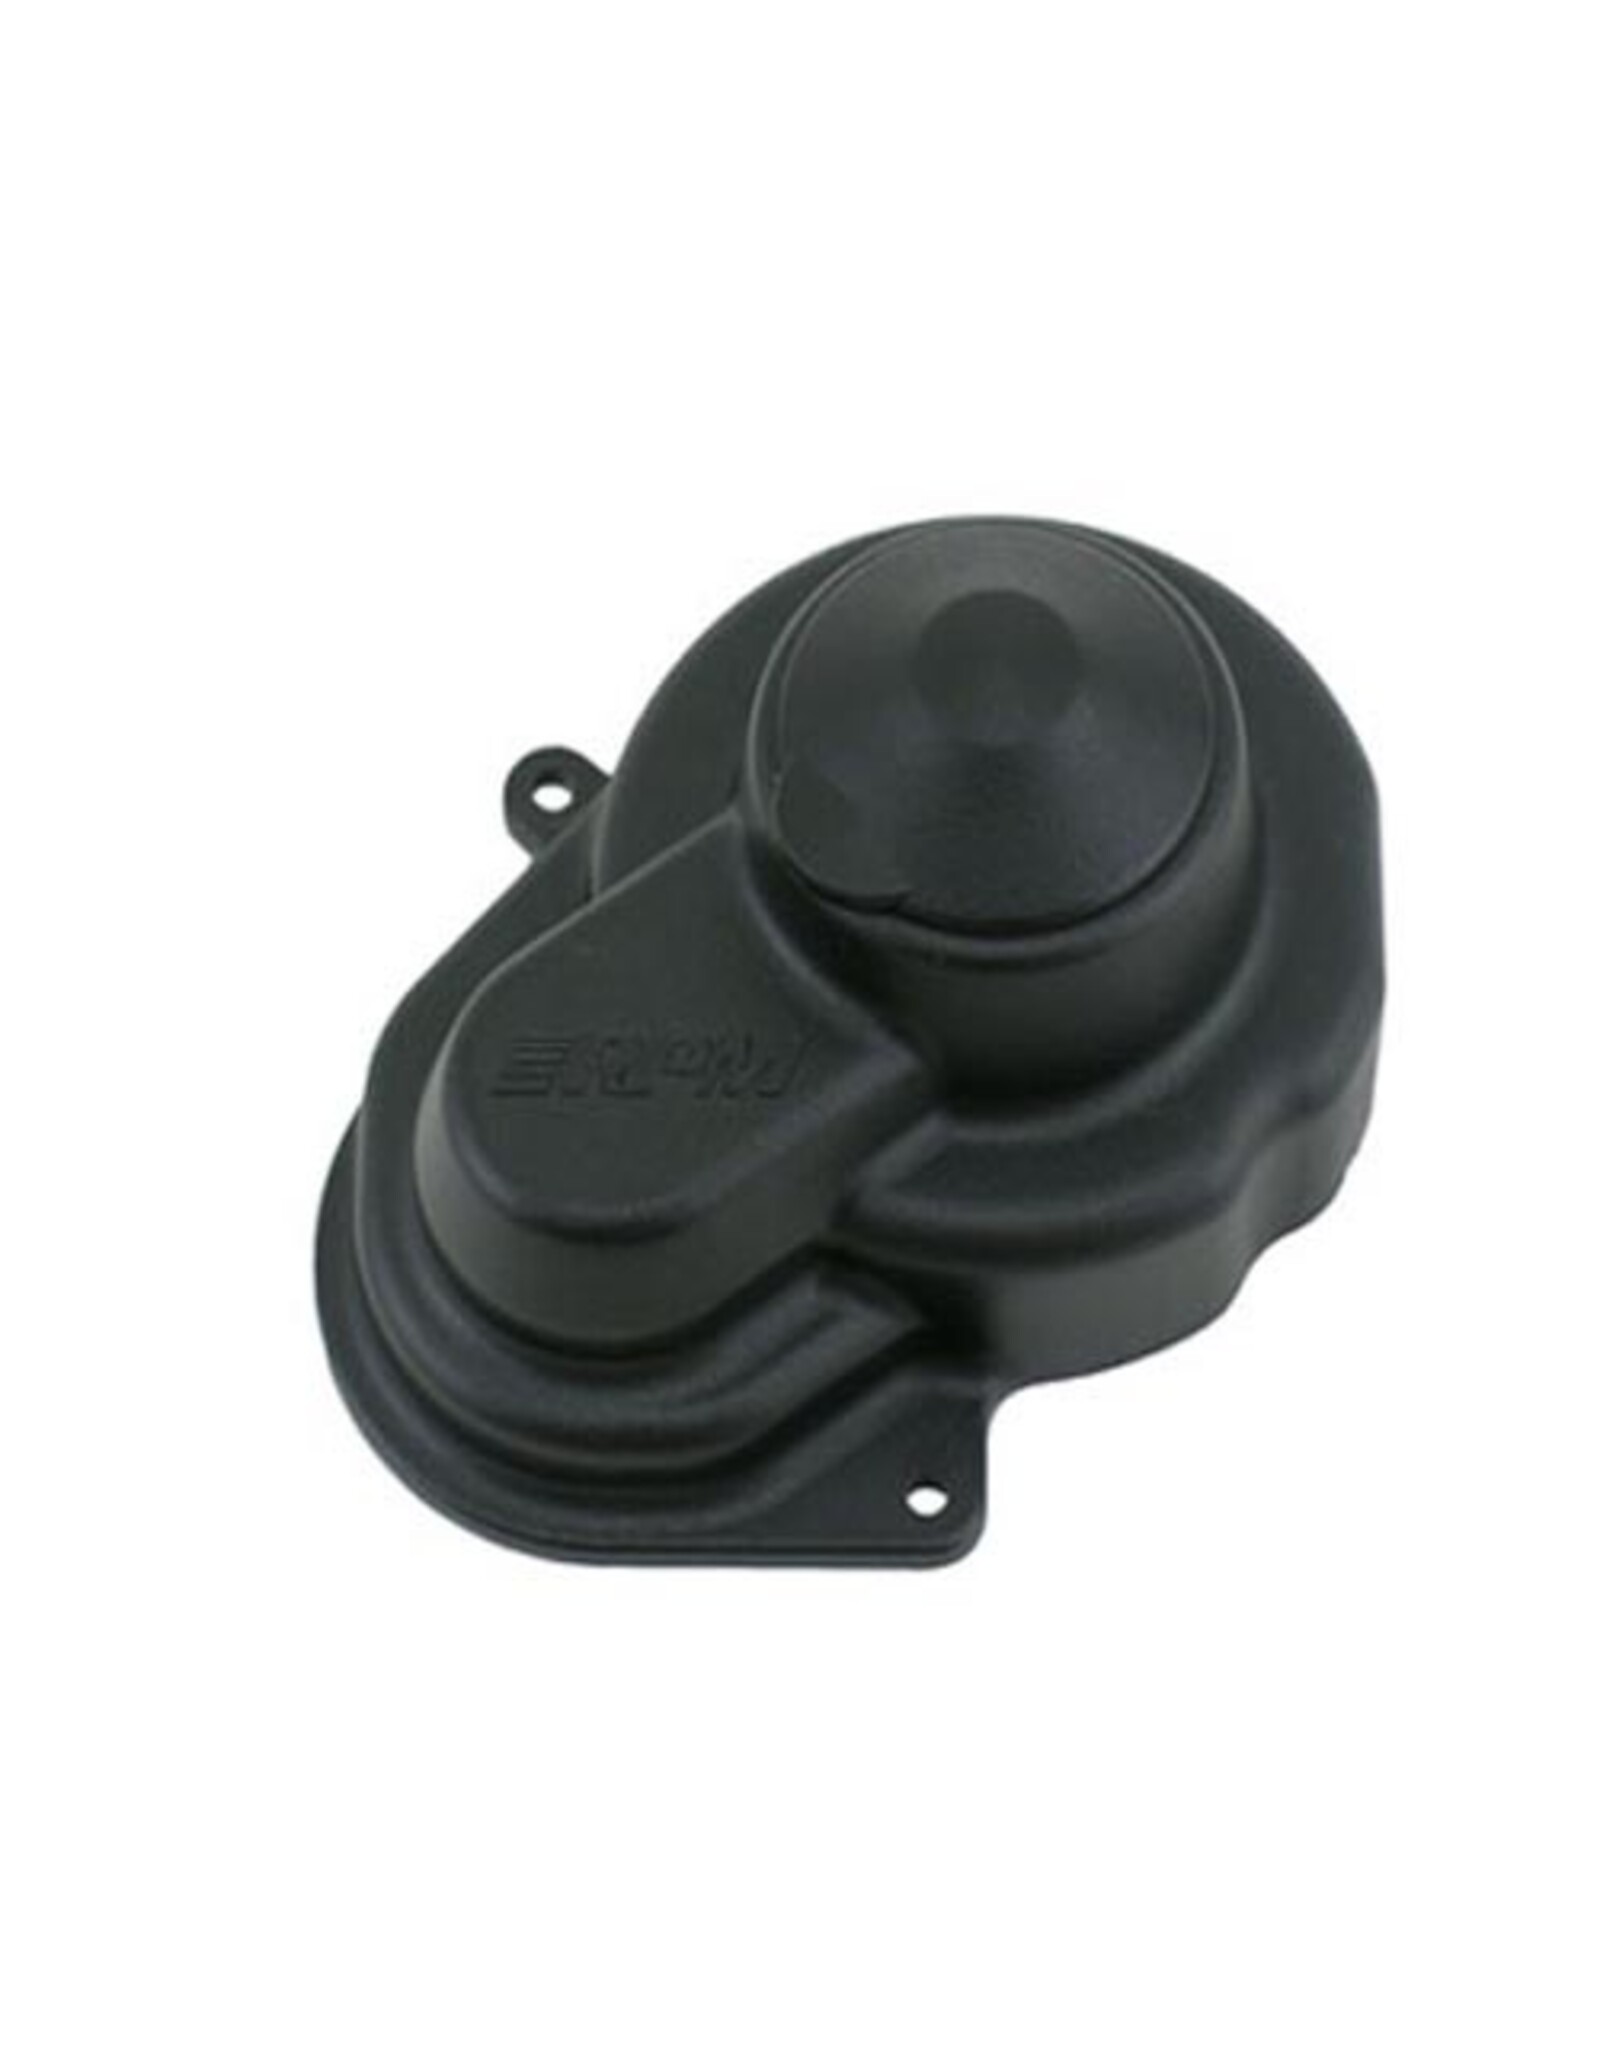 RPM Gear Cover for XL-5/VXL - Black